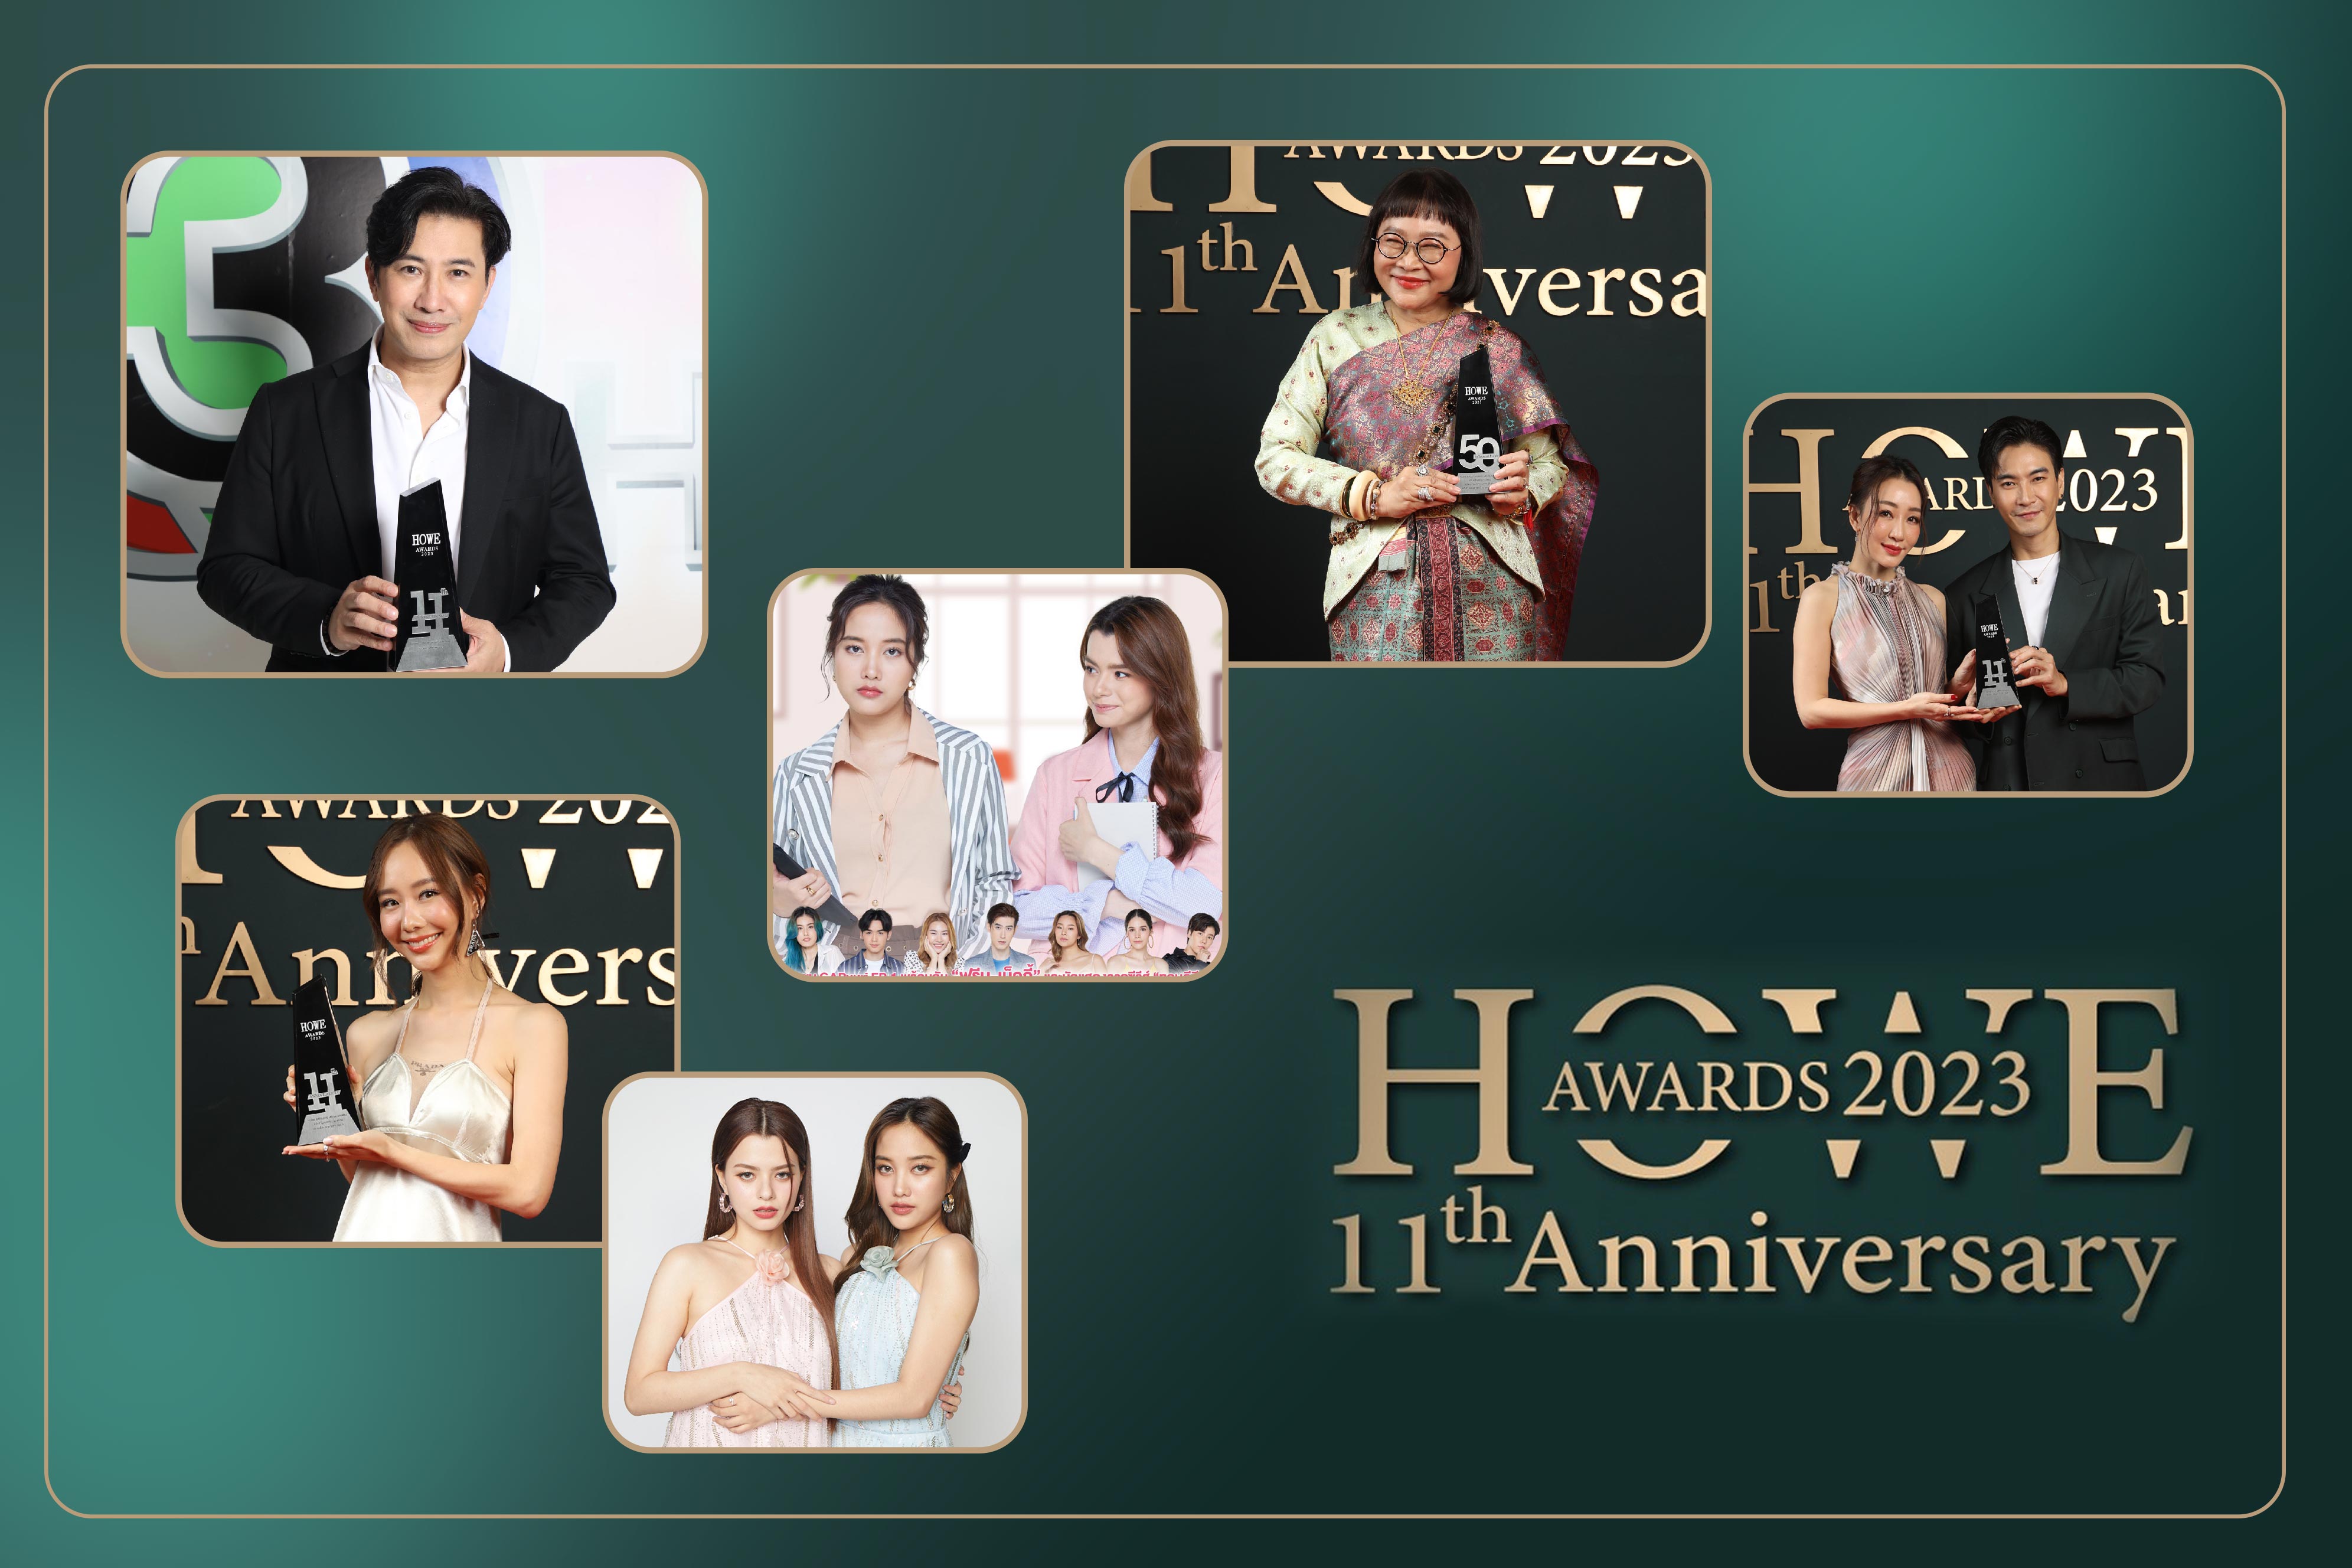 HOWE Magazine Awarded BEC Celebrities for their Achievements